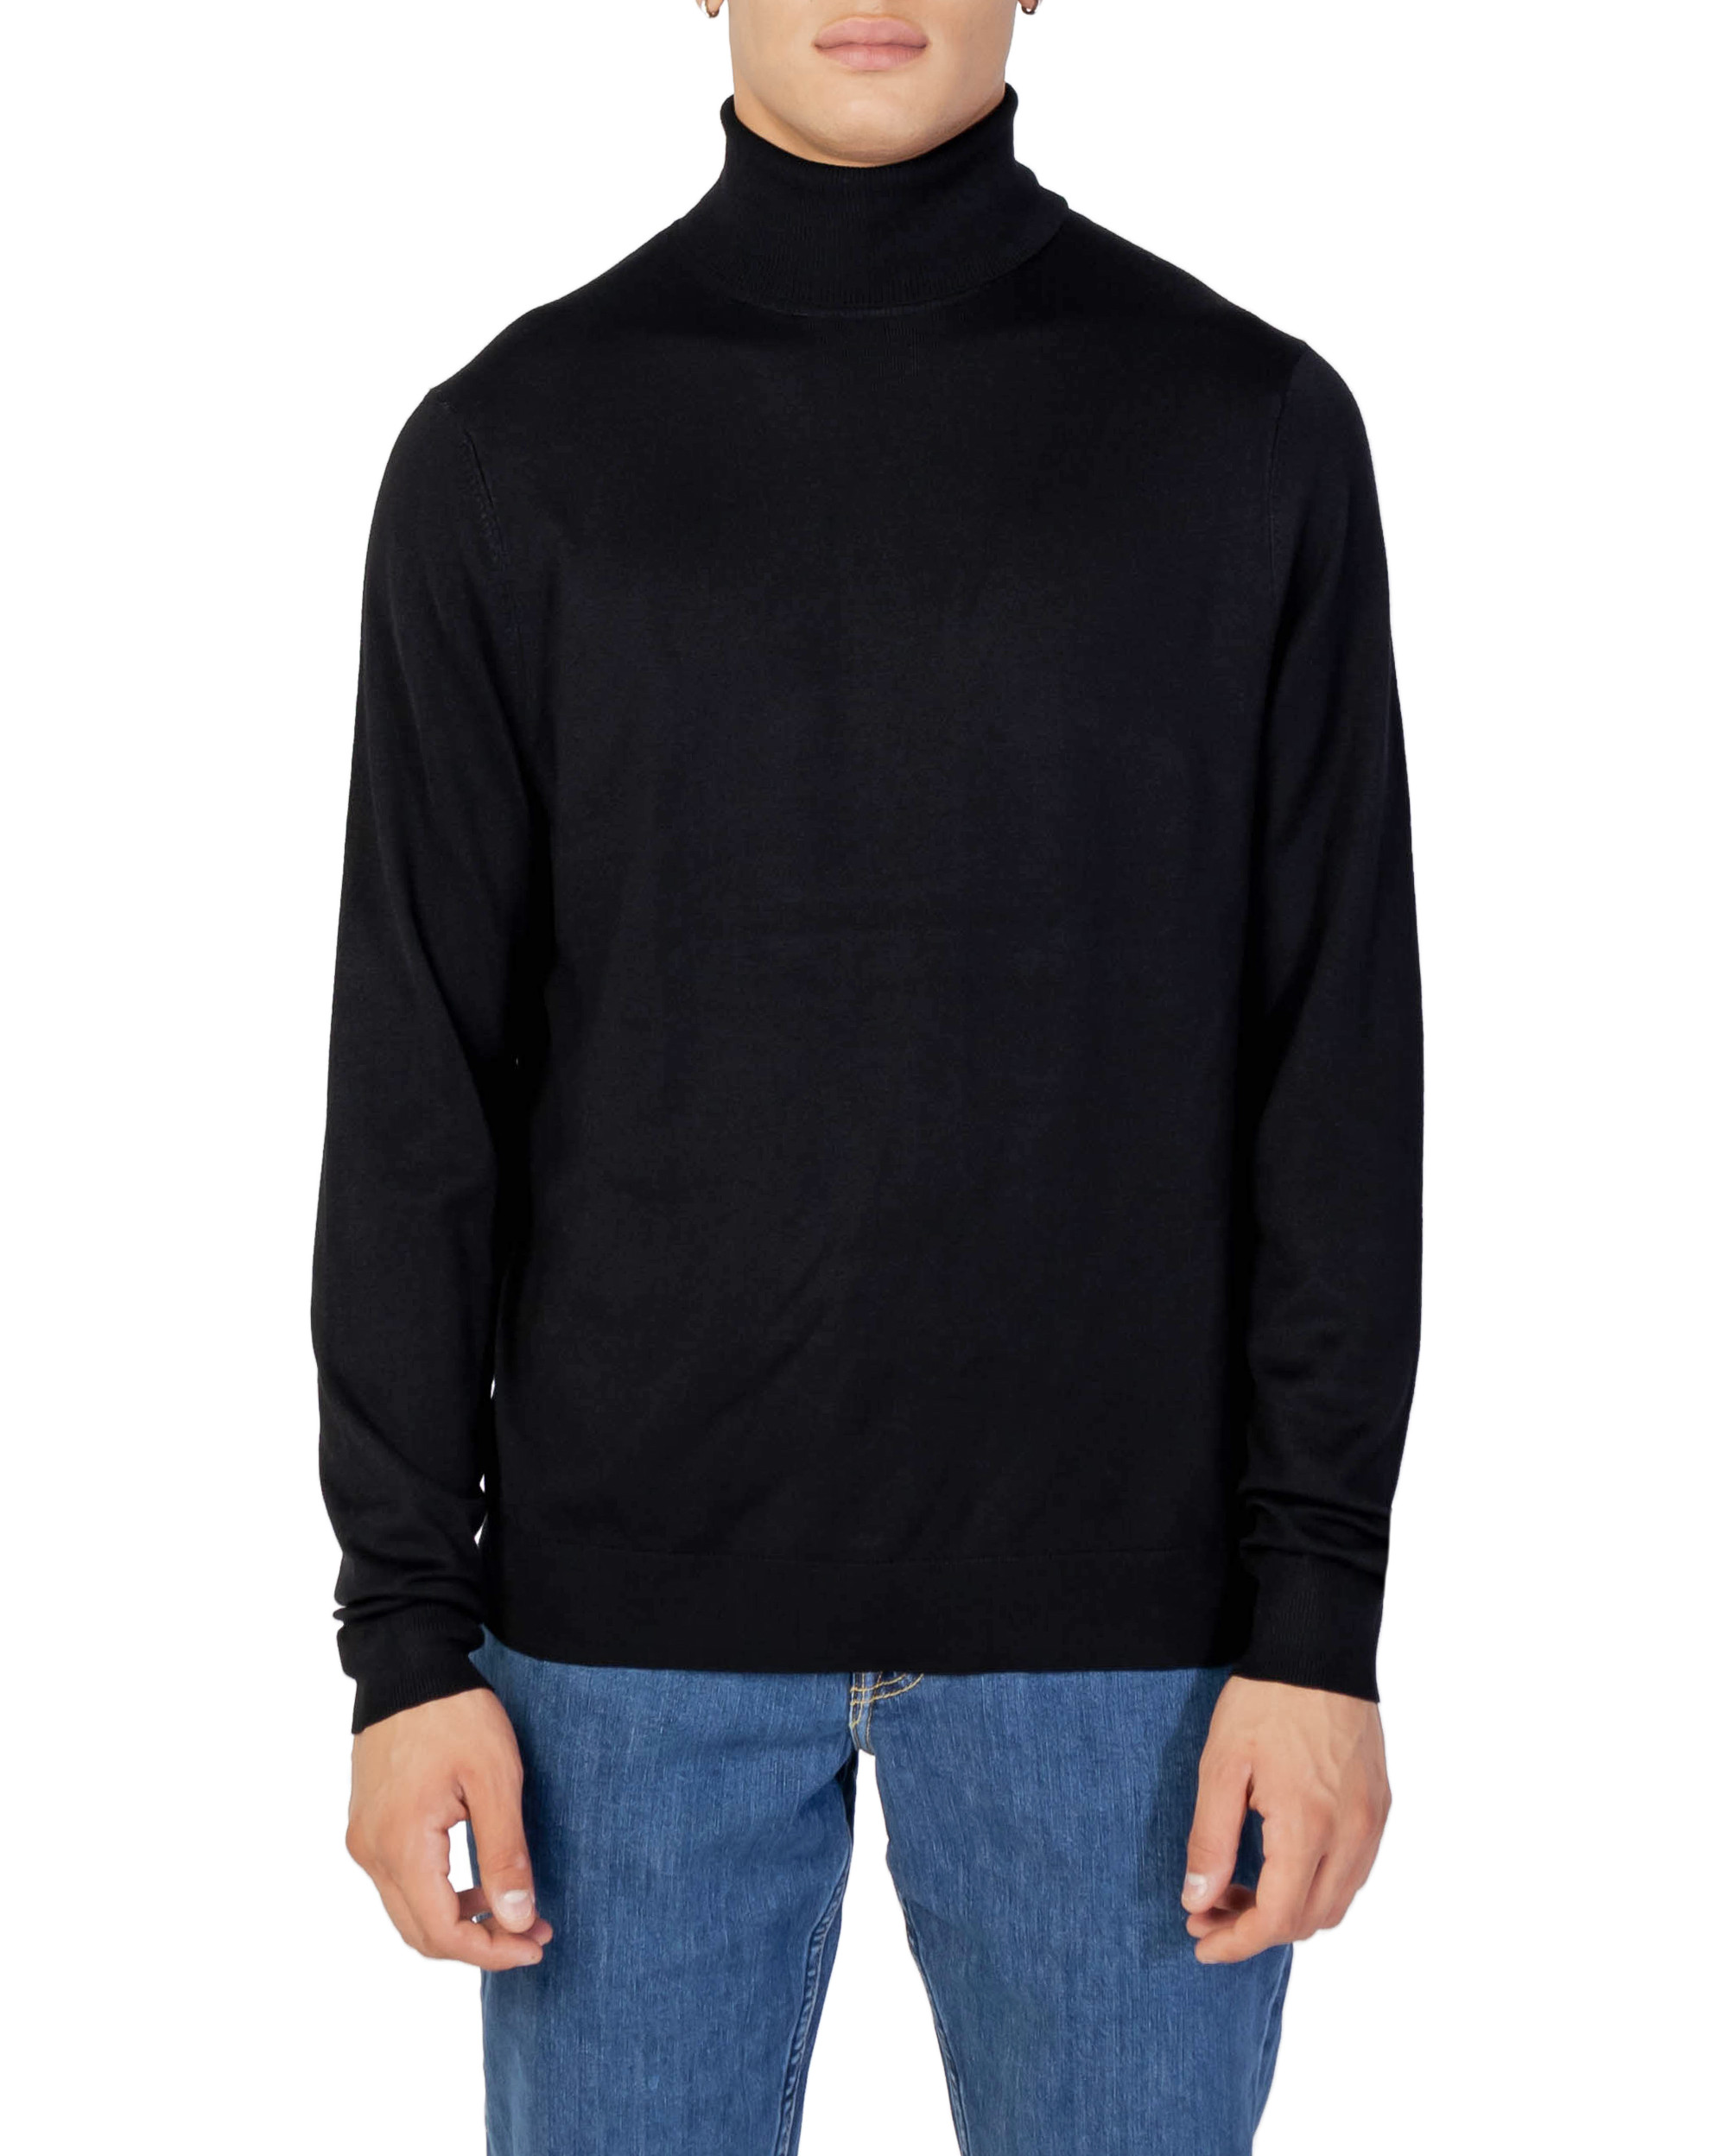 Turtleneck Knitwear with Long Sleeves